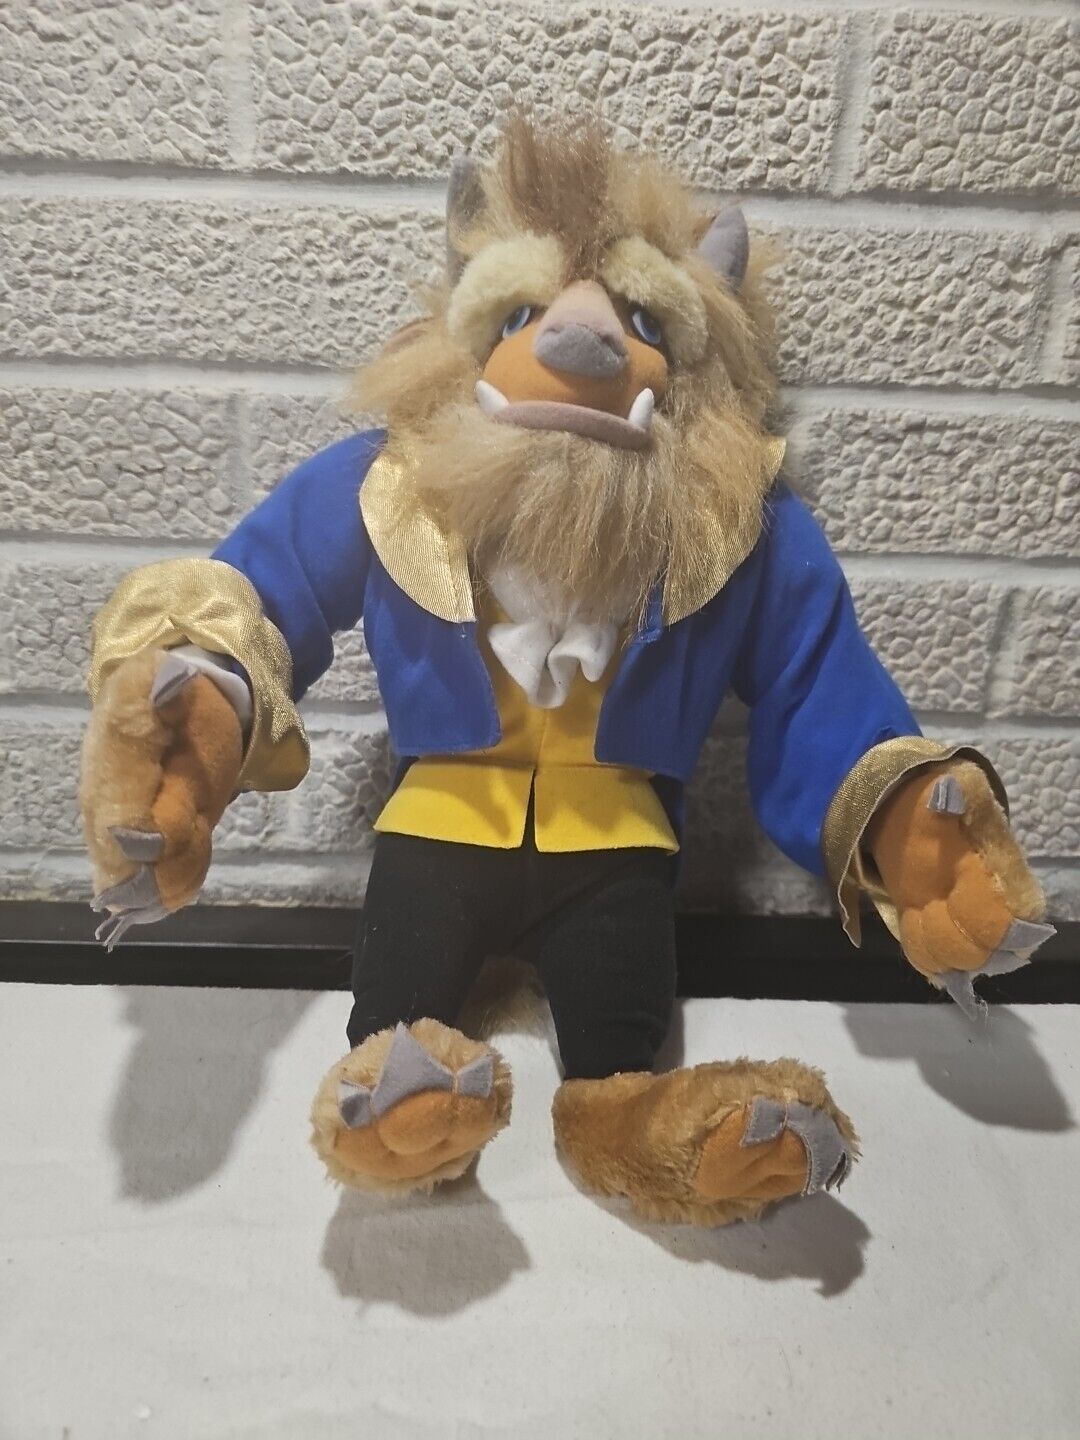 Disney Mattel Beauty and Beast Plush 1992 Doll 15in Lion Man in Suit Vintage